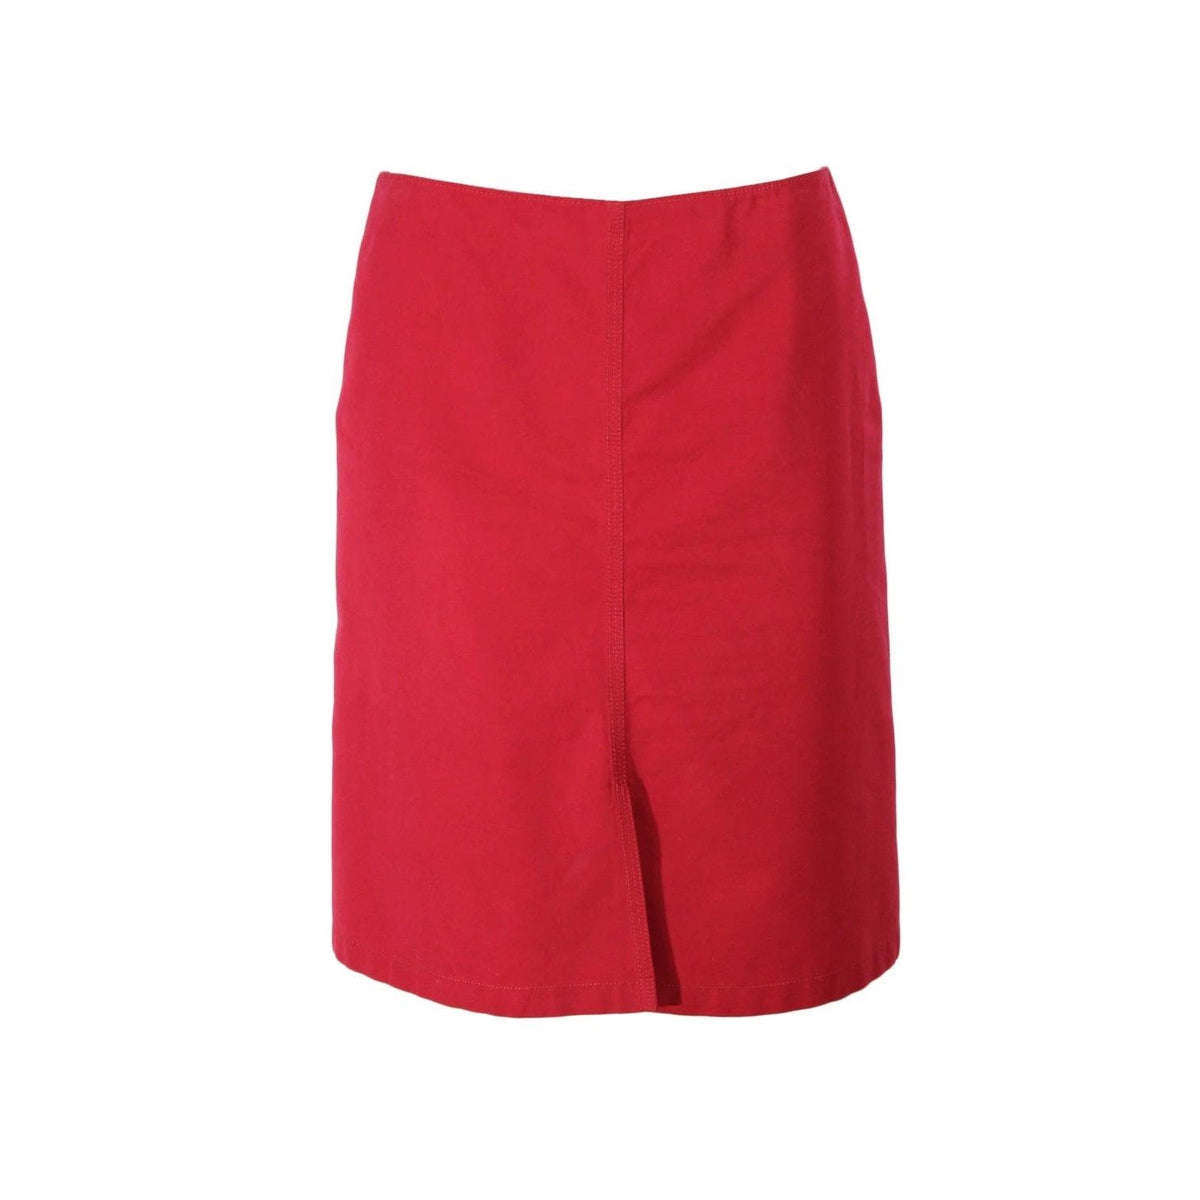 Pre-Owned JIL SANDER Red Skirt | Size 38 - theREMODA